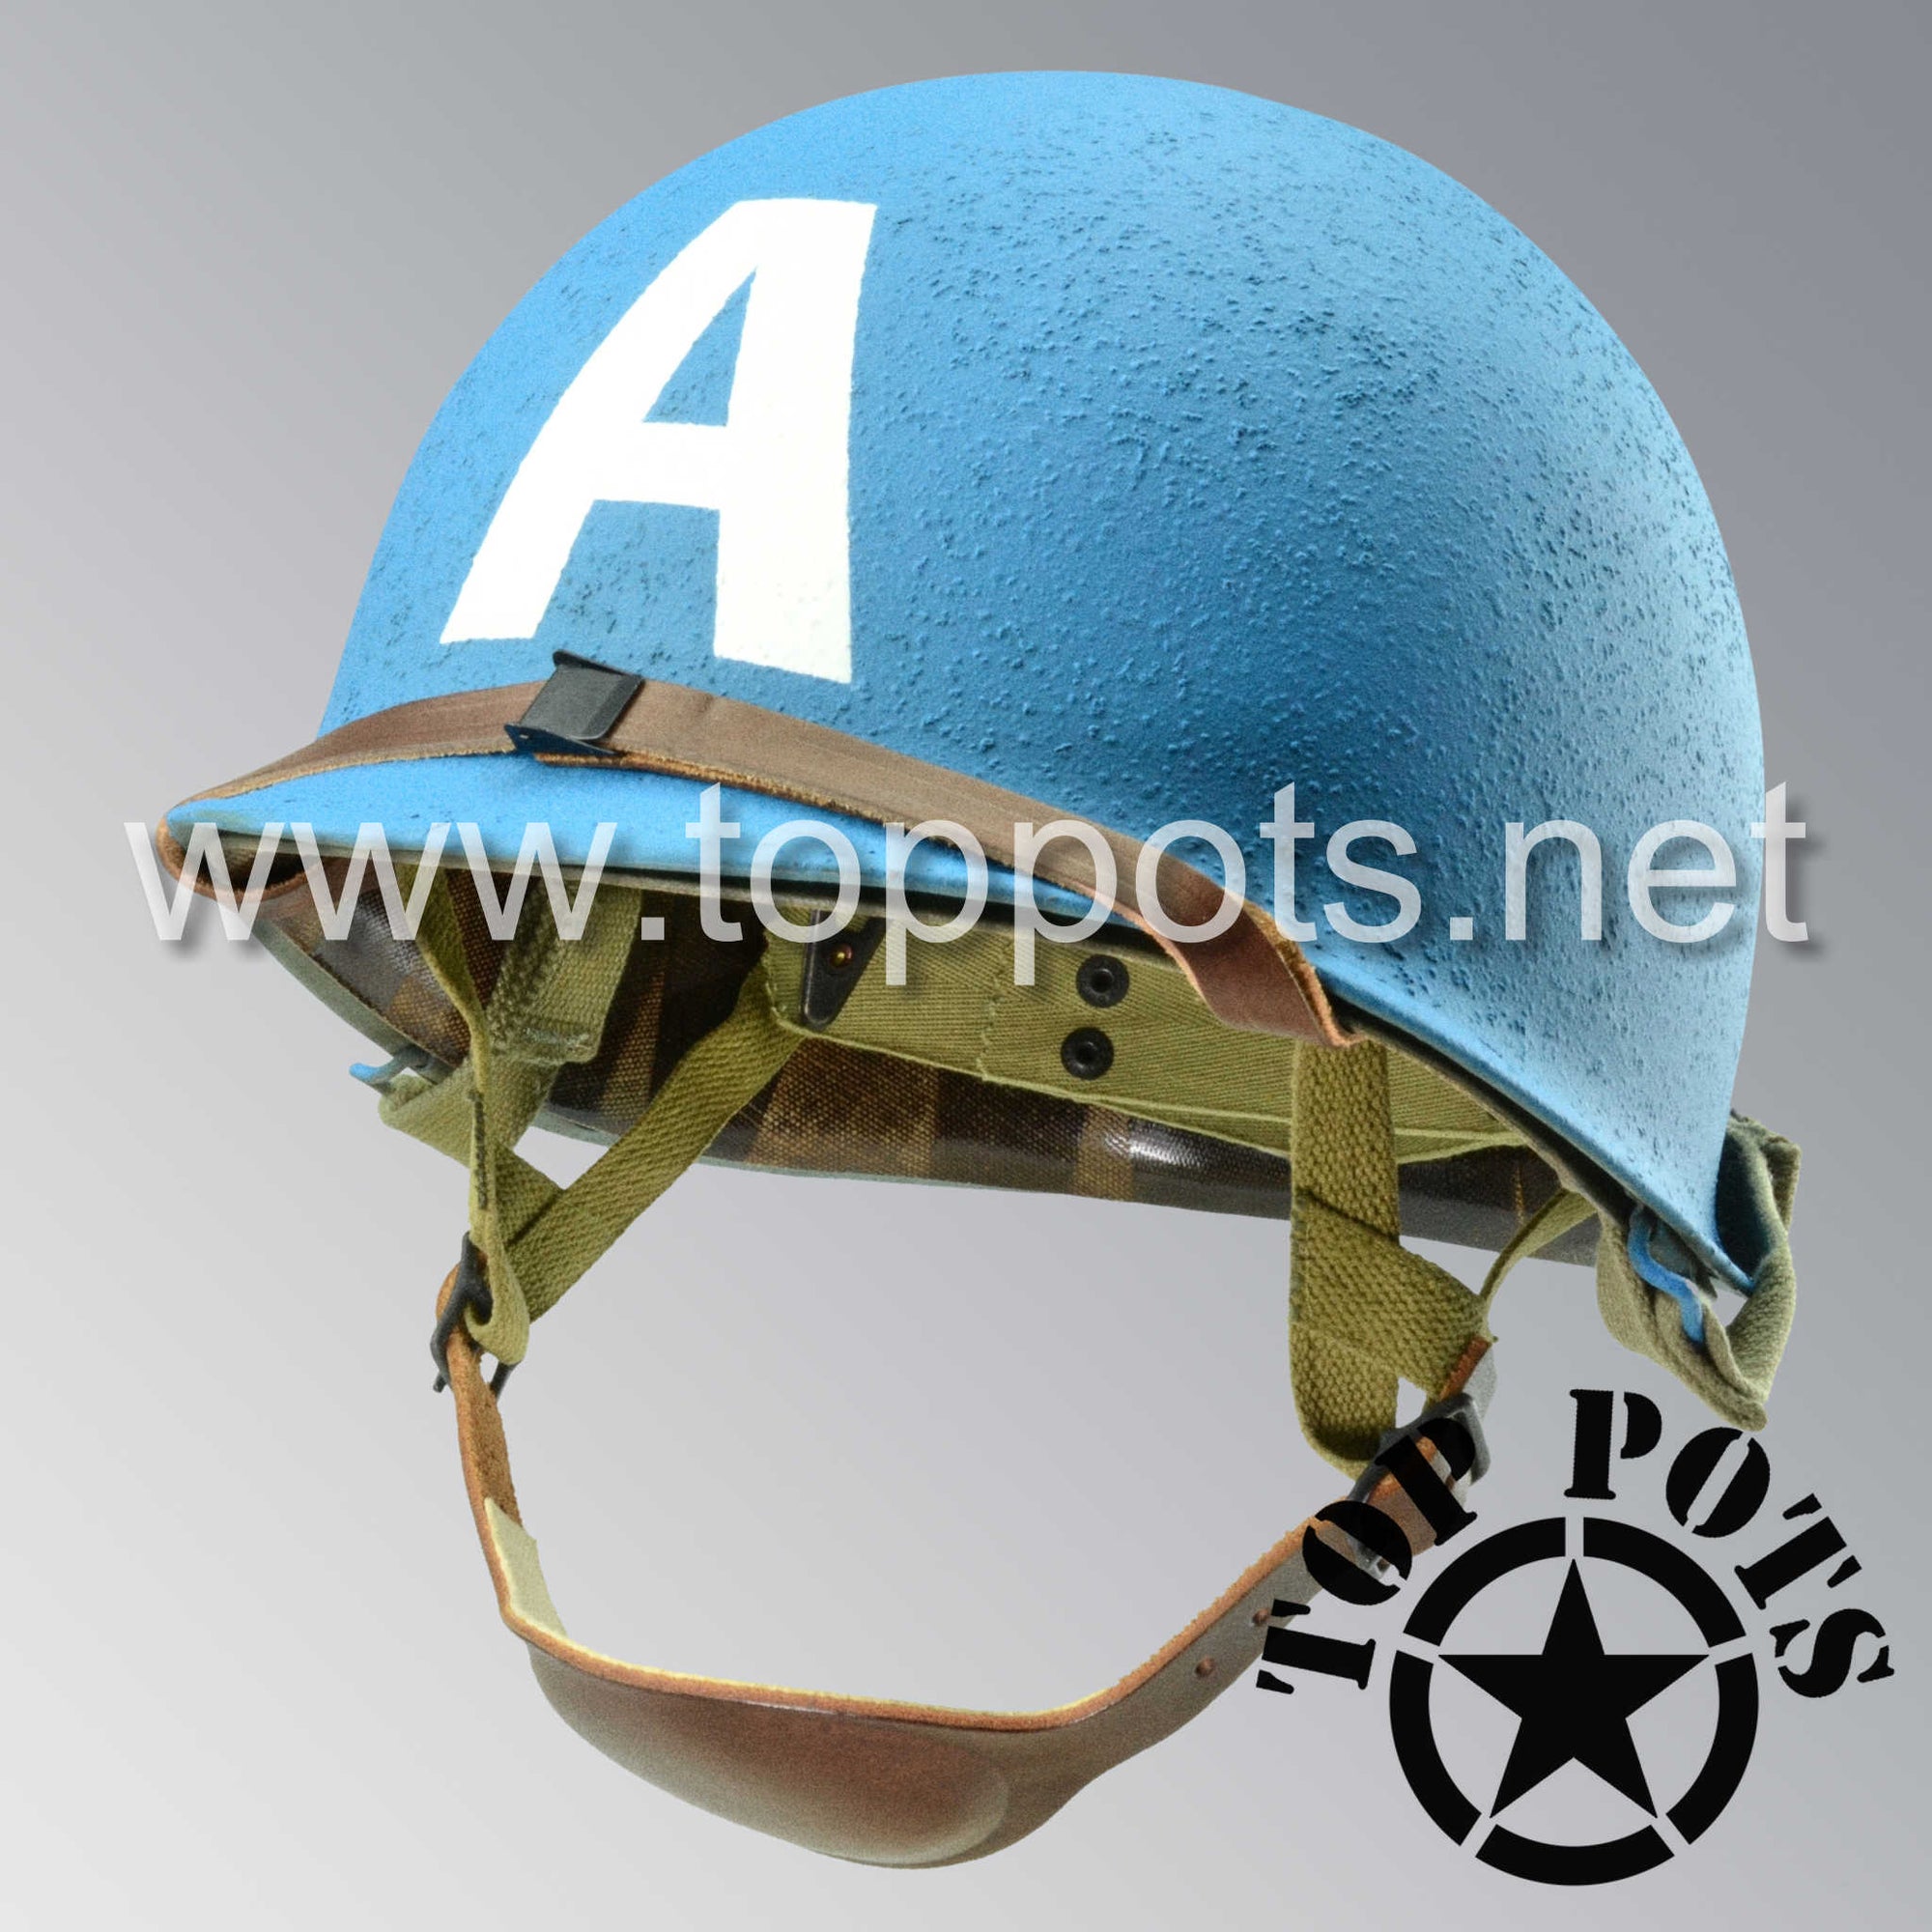 WWII US Army Restored Original M1C Paratrooper Airborne Helmet Swivel Bale Shell and Liner with Captain America Emblem